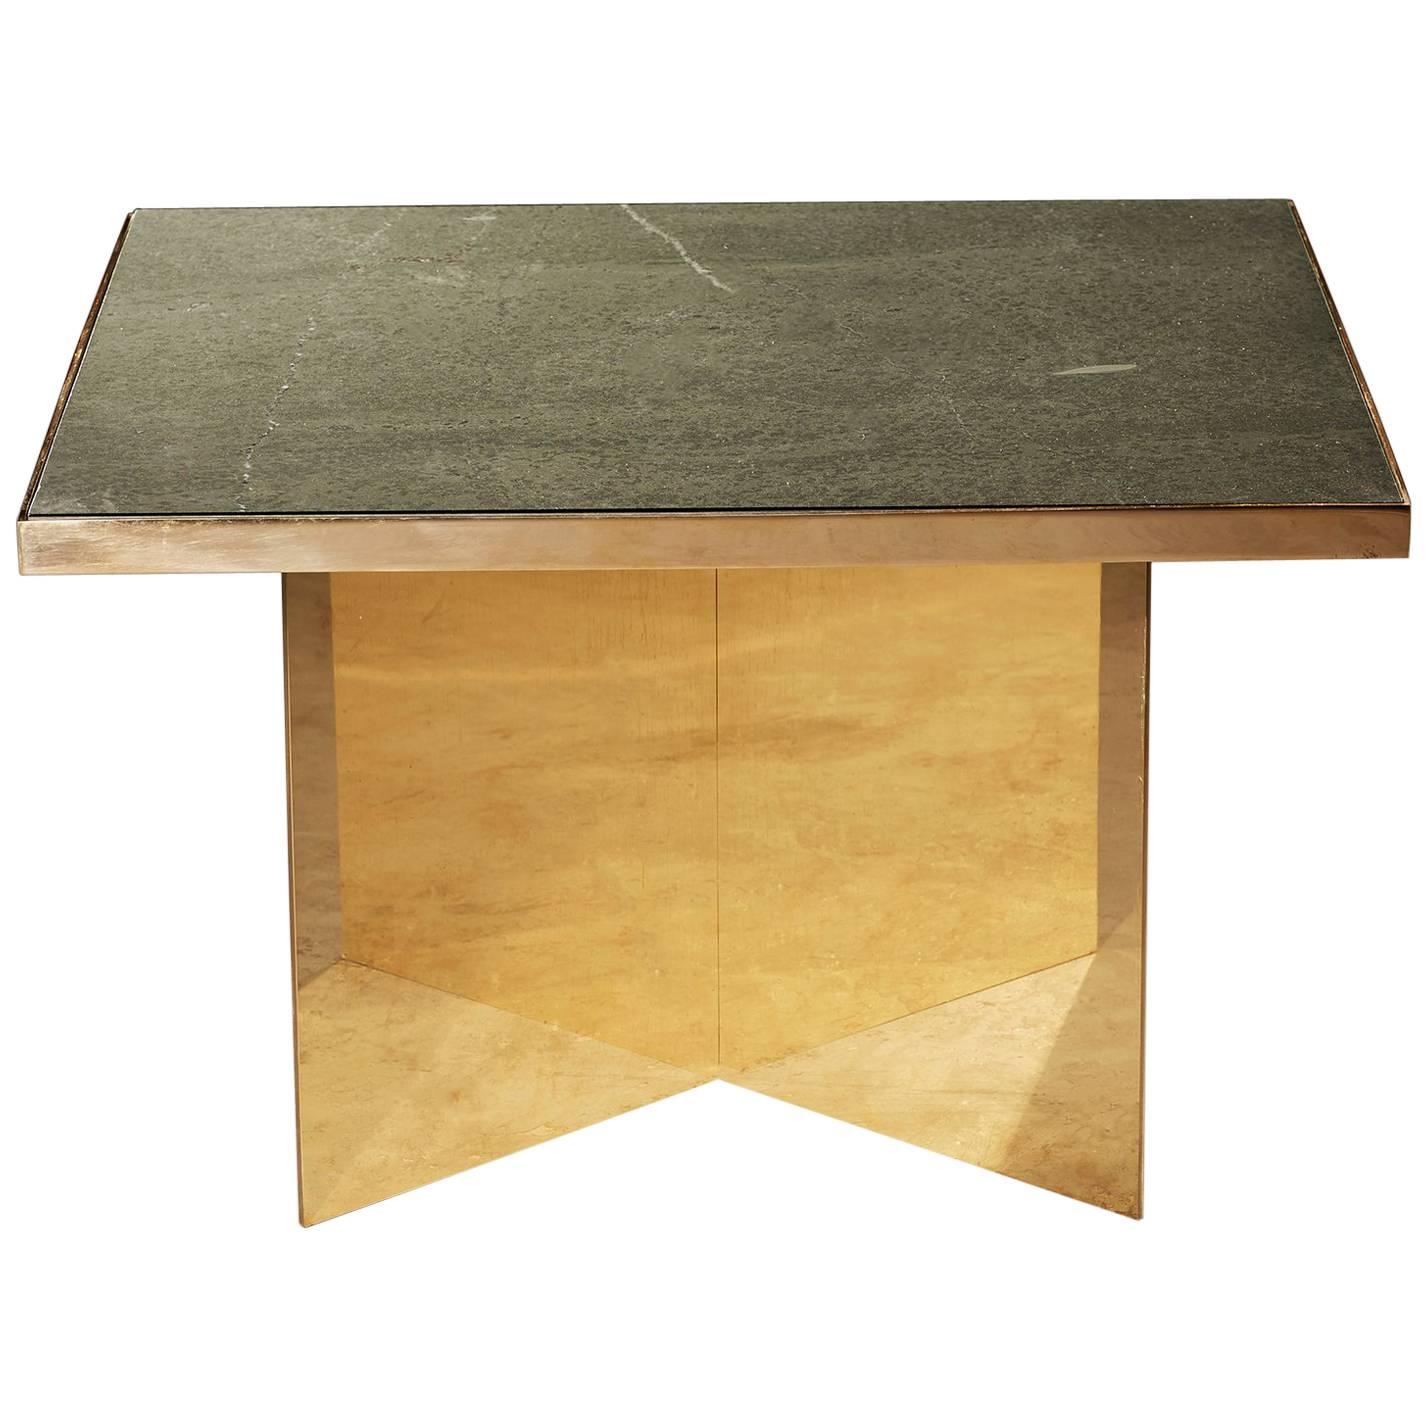 Verdi Coffee Table — Medium — Solid Brass Plate Base — Honed Cumbrian Slate Top For Sale